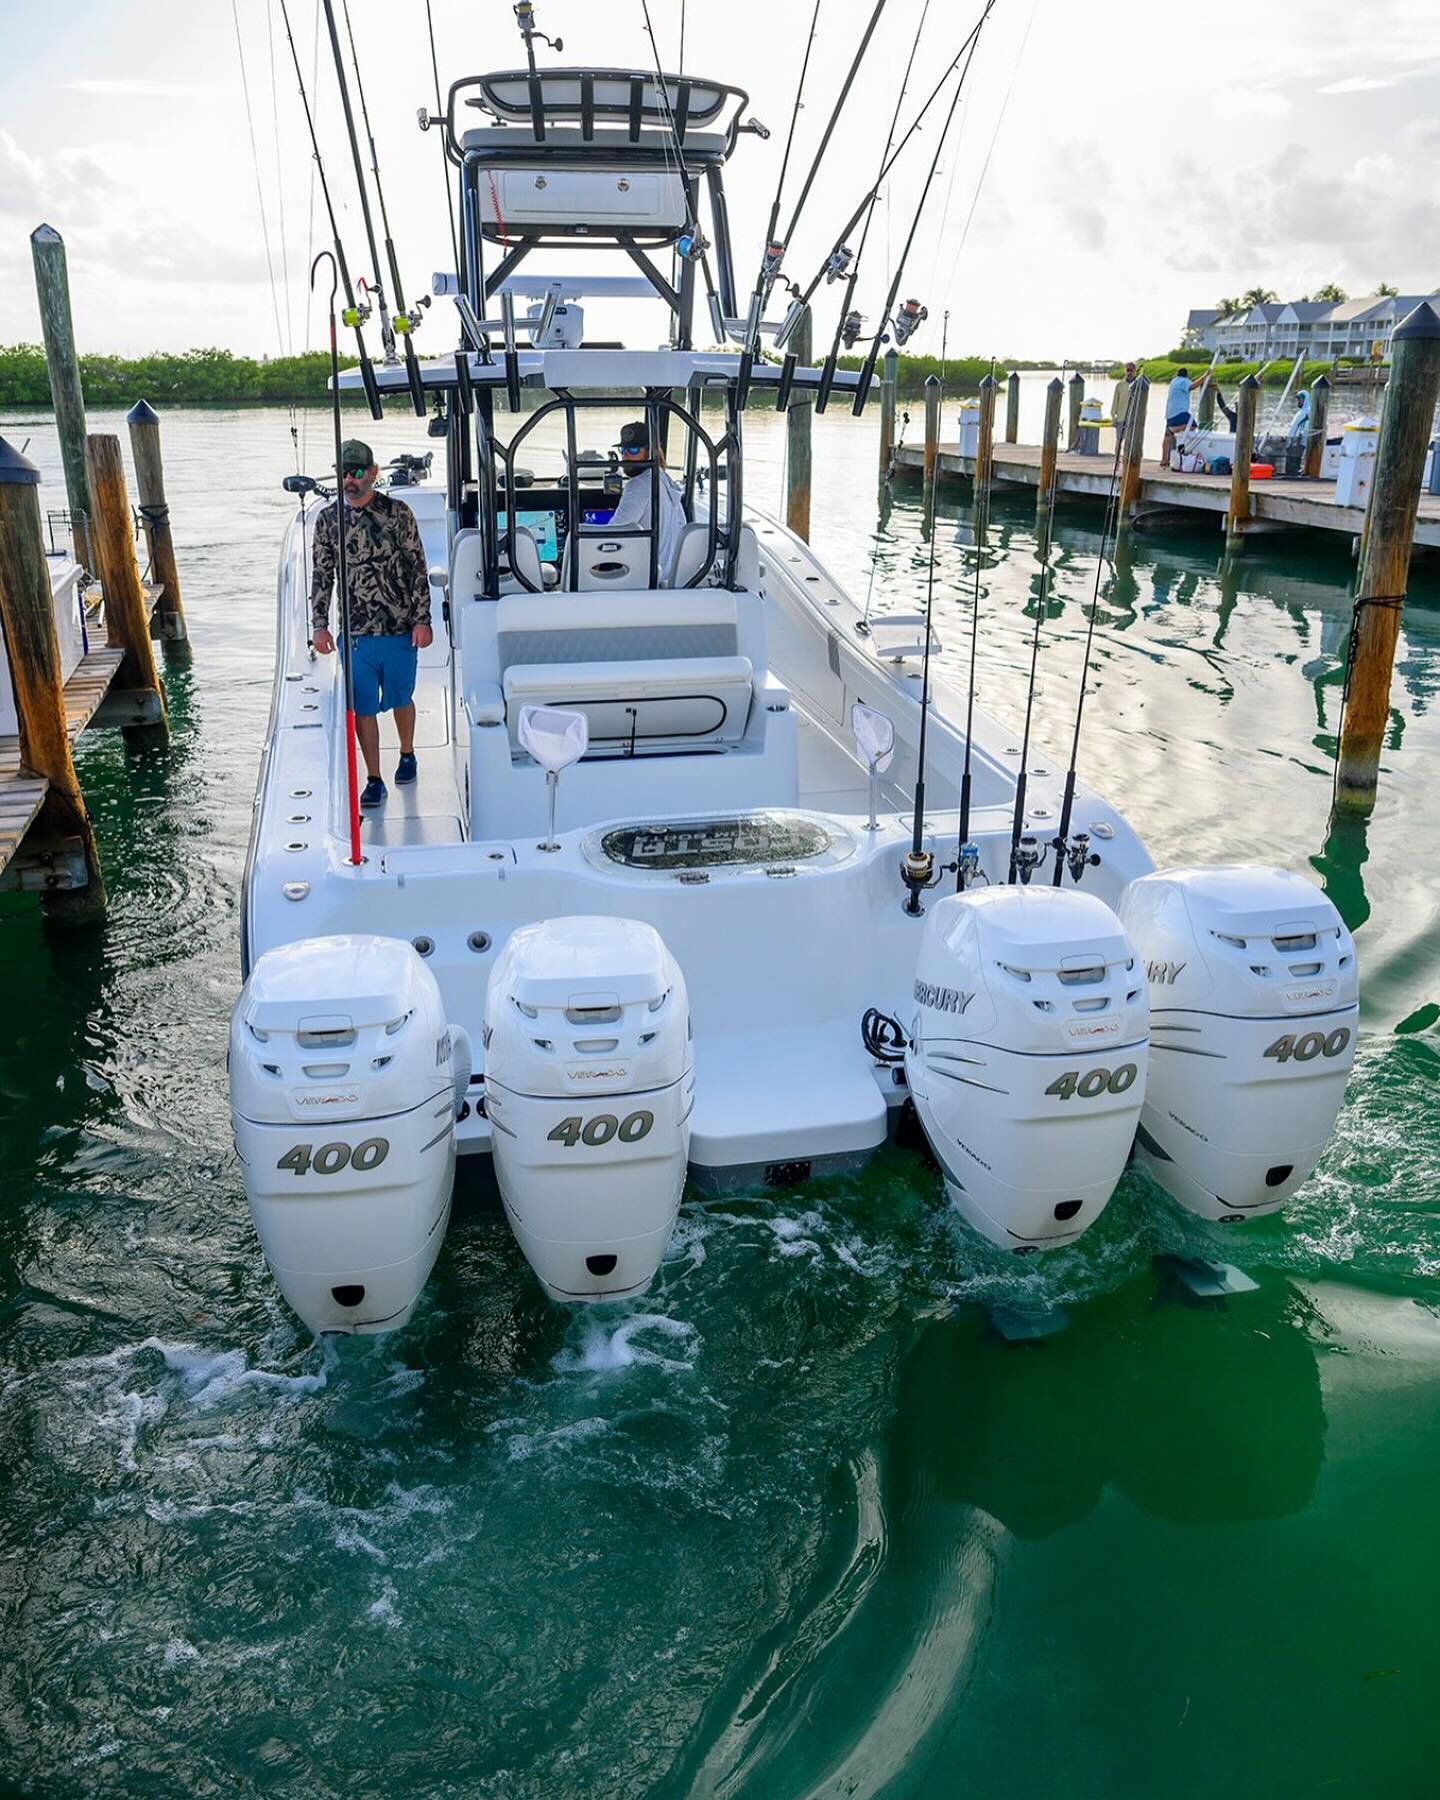 Where ever we&rsquo;re going it&rsquo;s going to be a quick ride 🏁🏴&zwj;☠️

@costacustomboats 
@westmarine 
@waypointtv 

#horsesintheback #fast #quickride #headingout #costacustomboats #westmarine #scalesgear #mercurymarine #fishing #wildlife #out